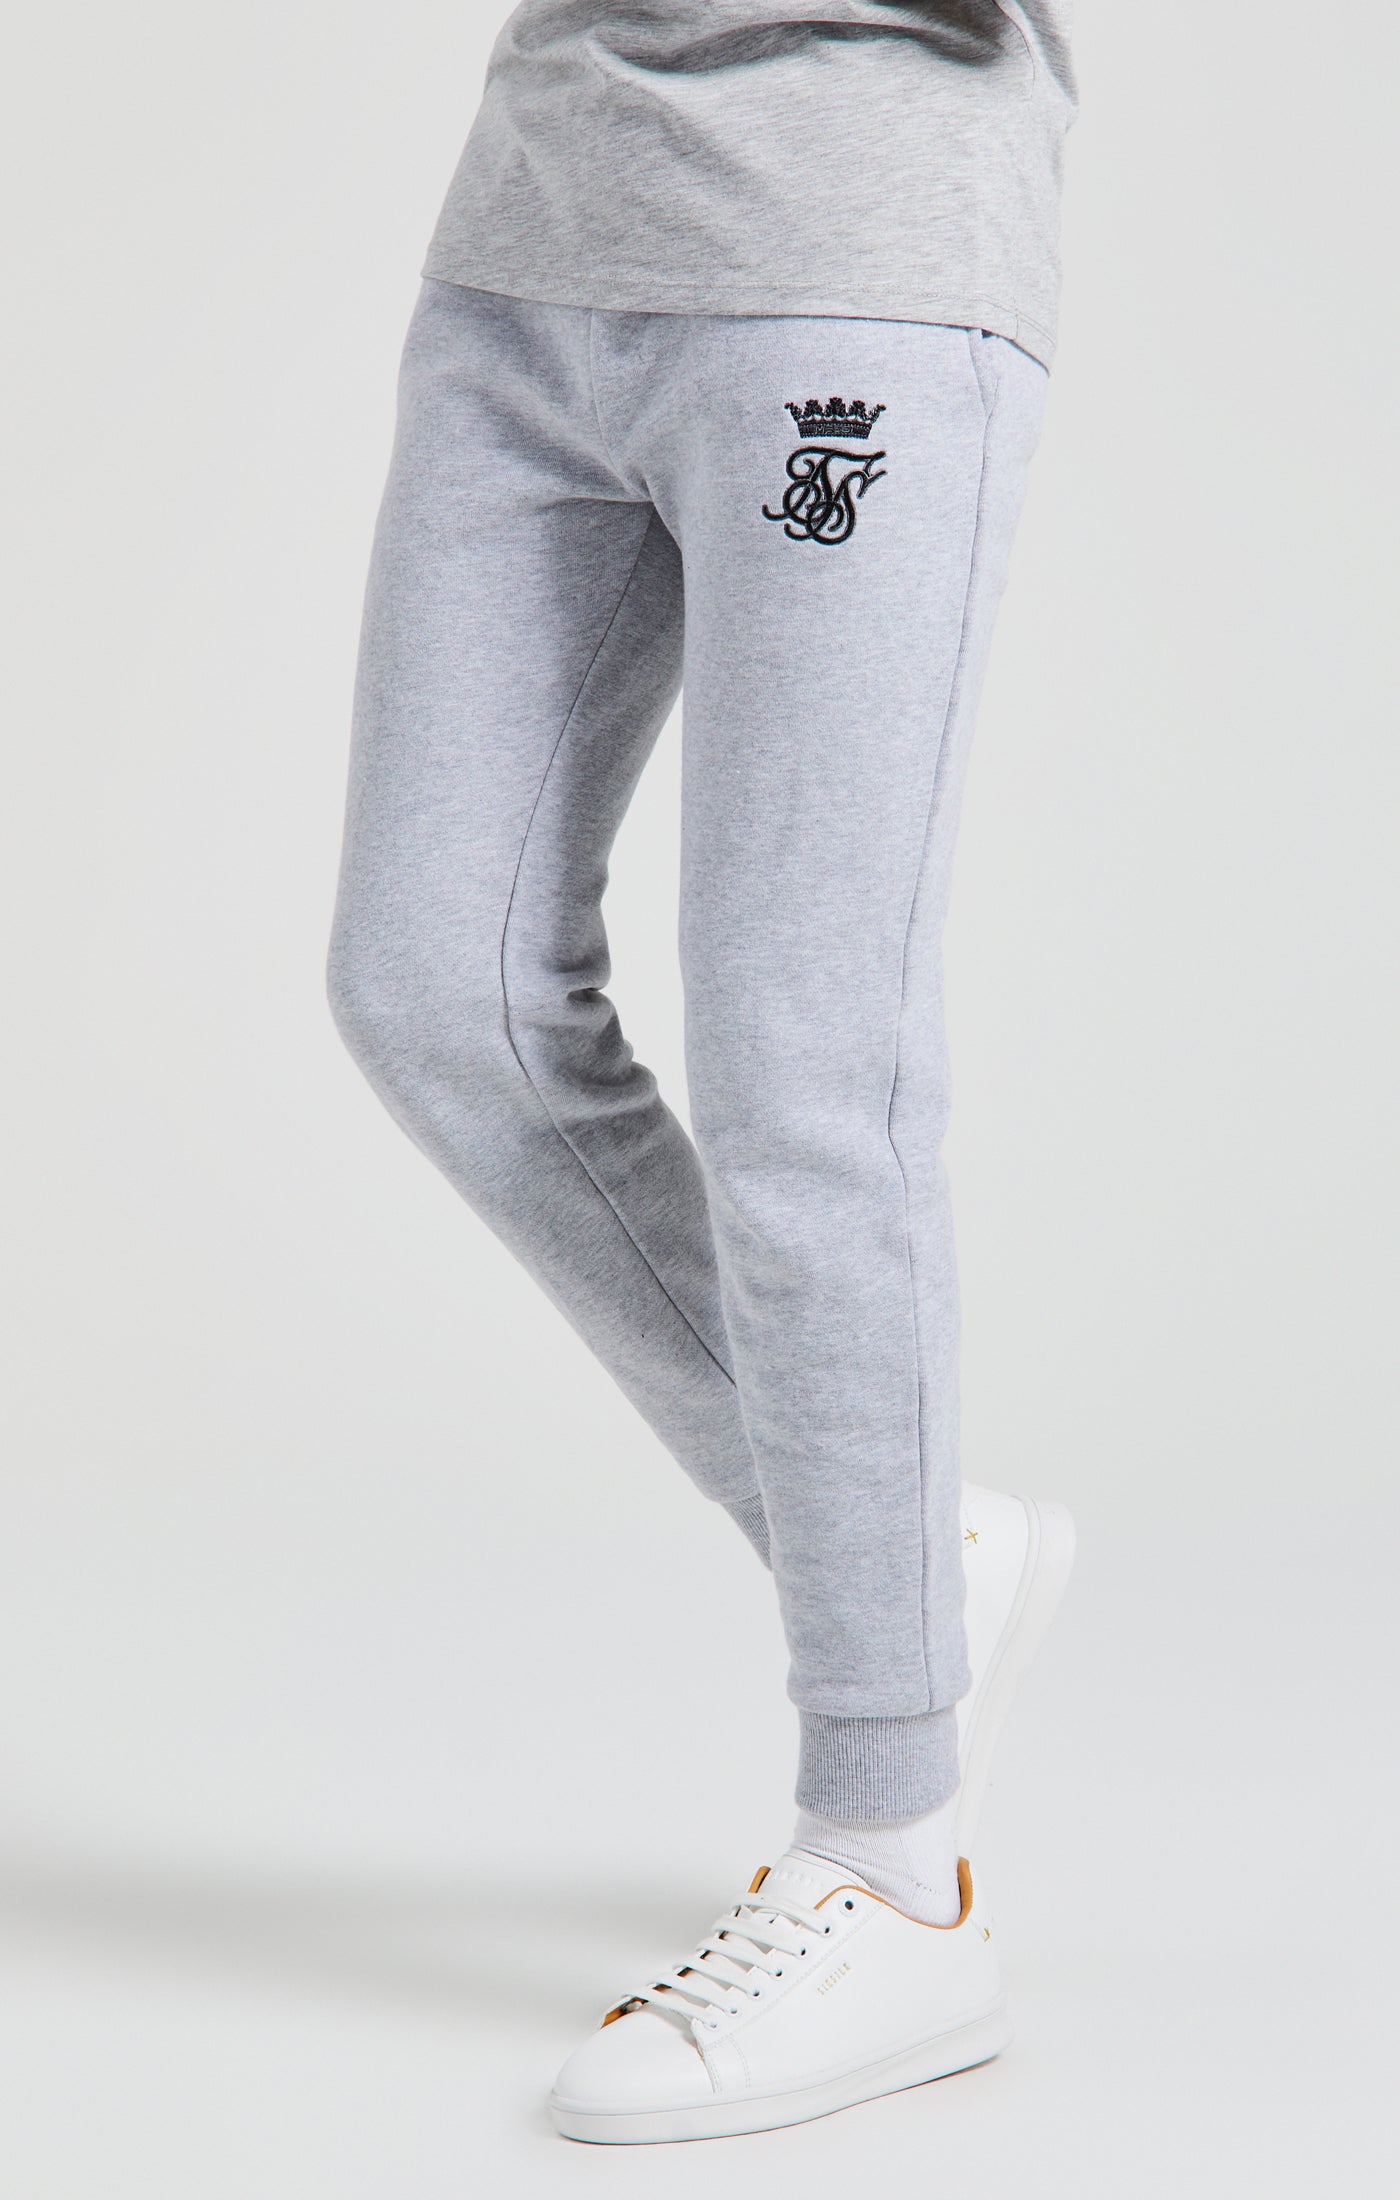 Load image into Gallery viewer, Boys Messi x SikSilk Grey Marl Fleece Pant